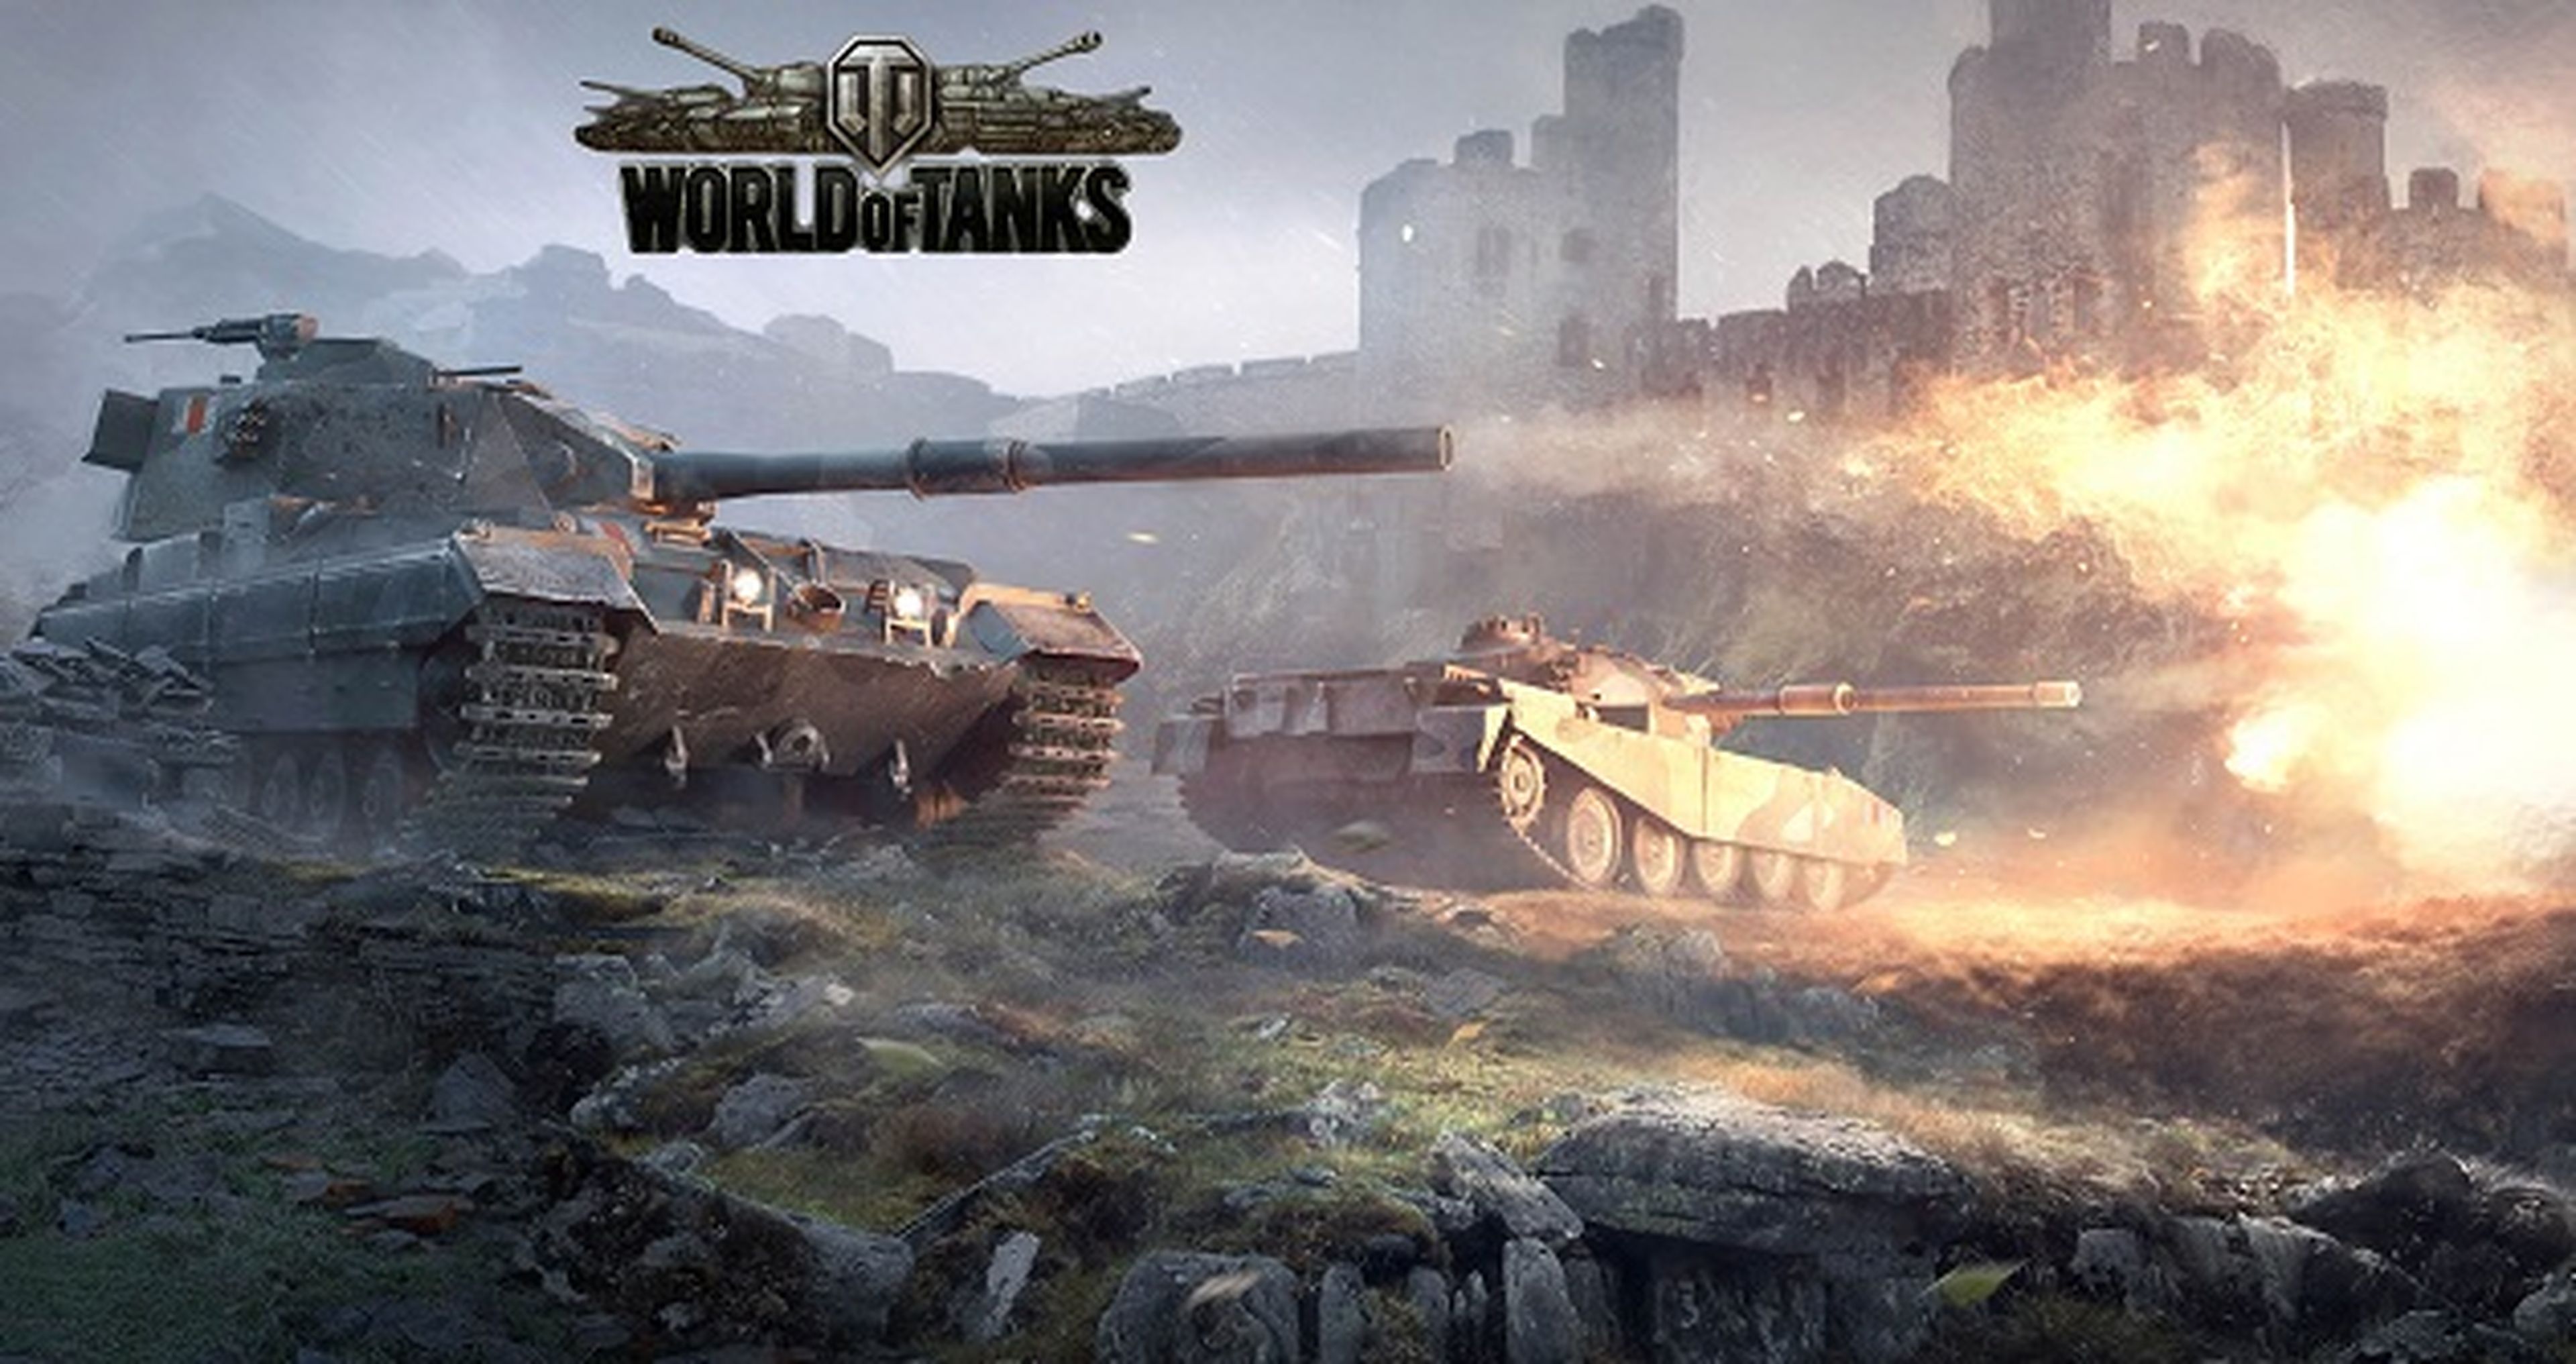 Especial finales World of Tanks 2014